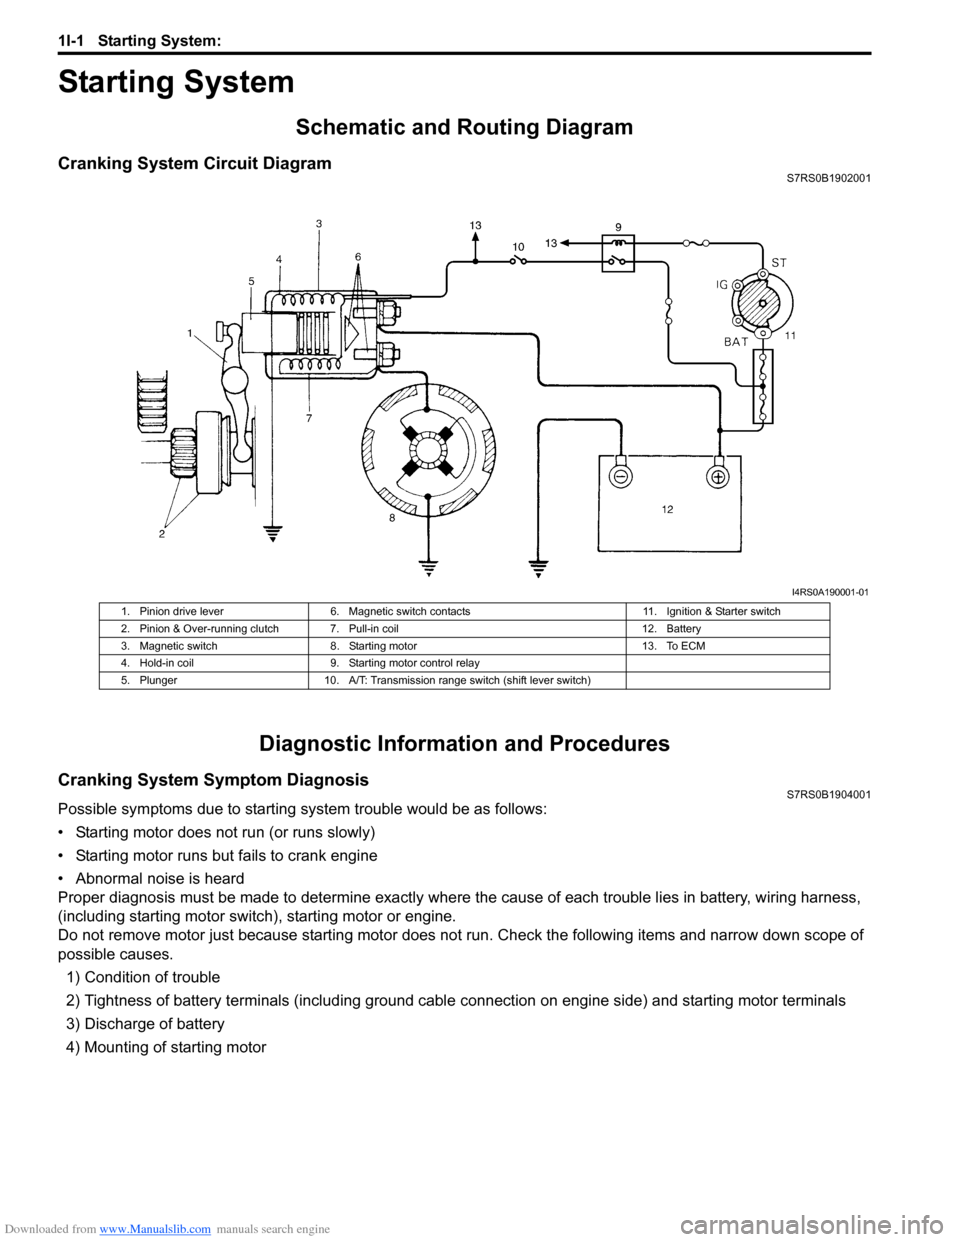 SUZUKI SWIFT 2006 2.G Service Manual PDF Downloaded from www.Manualslib.com manuals search engine 1I-1 Starting System: 
Engine
Starting System
Schematic and Routing Diagram
Cranking System Circuit DiagramS7RS0B1902001
Diagnostic Information